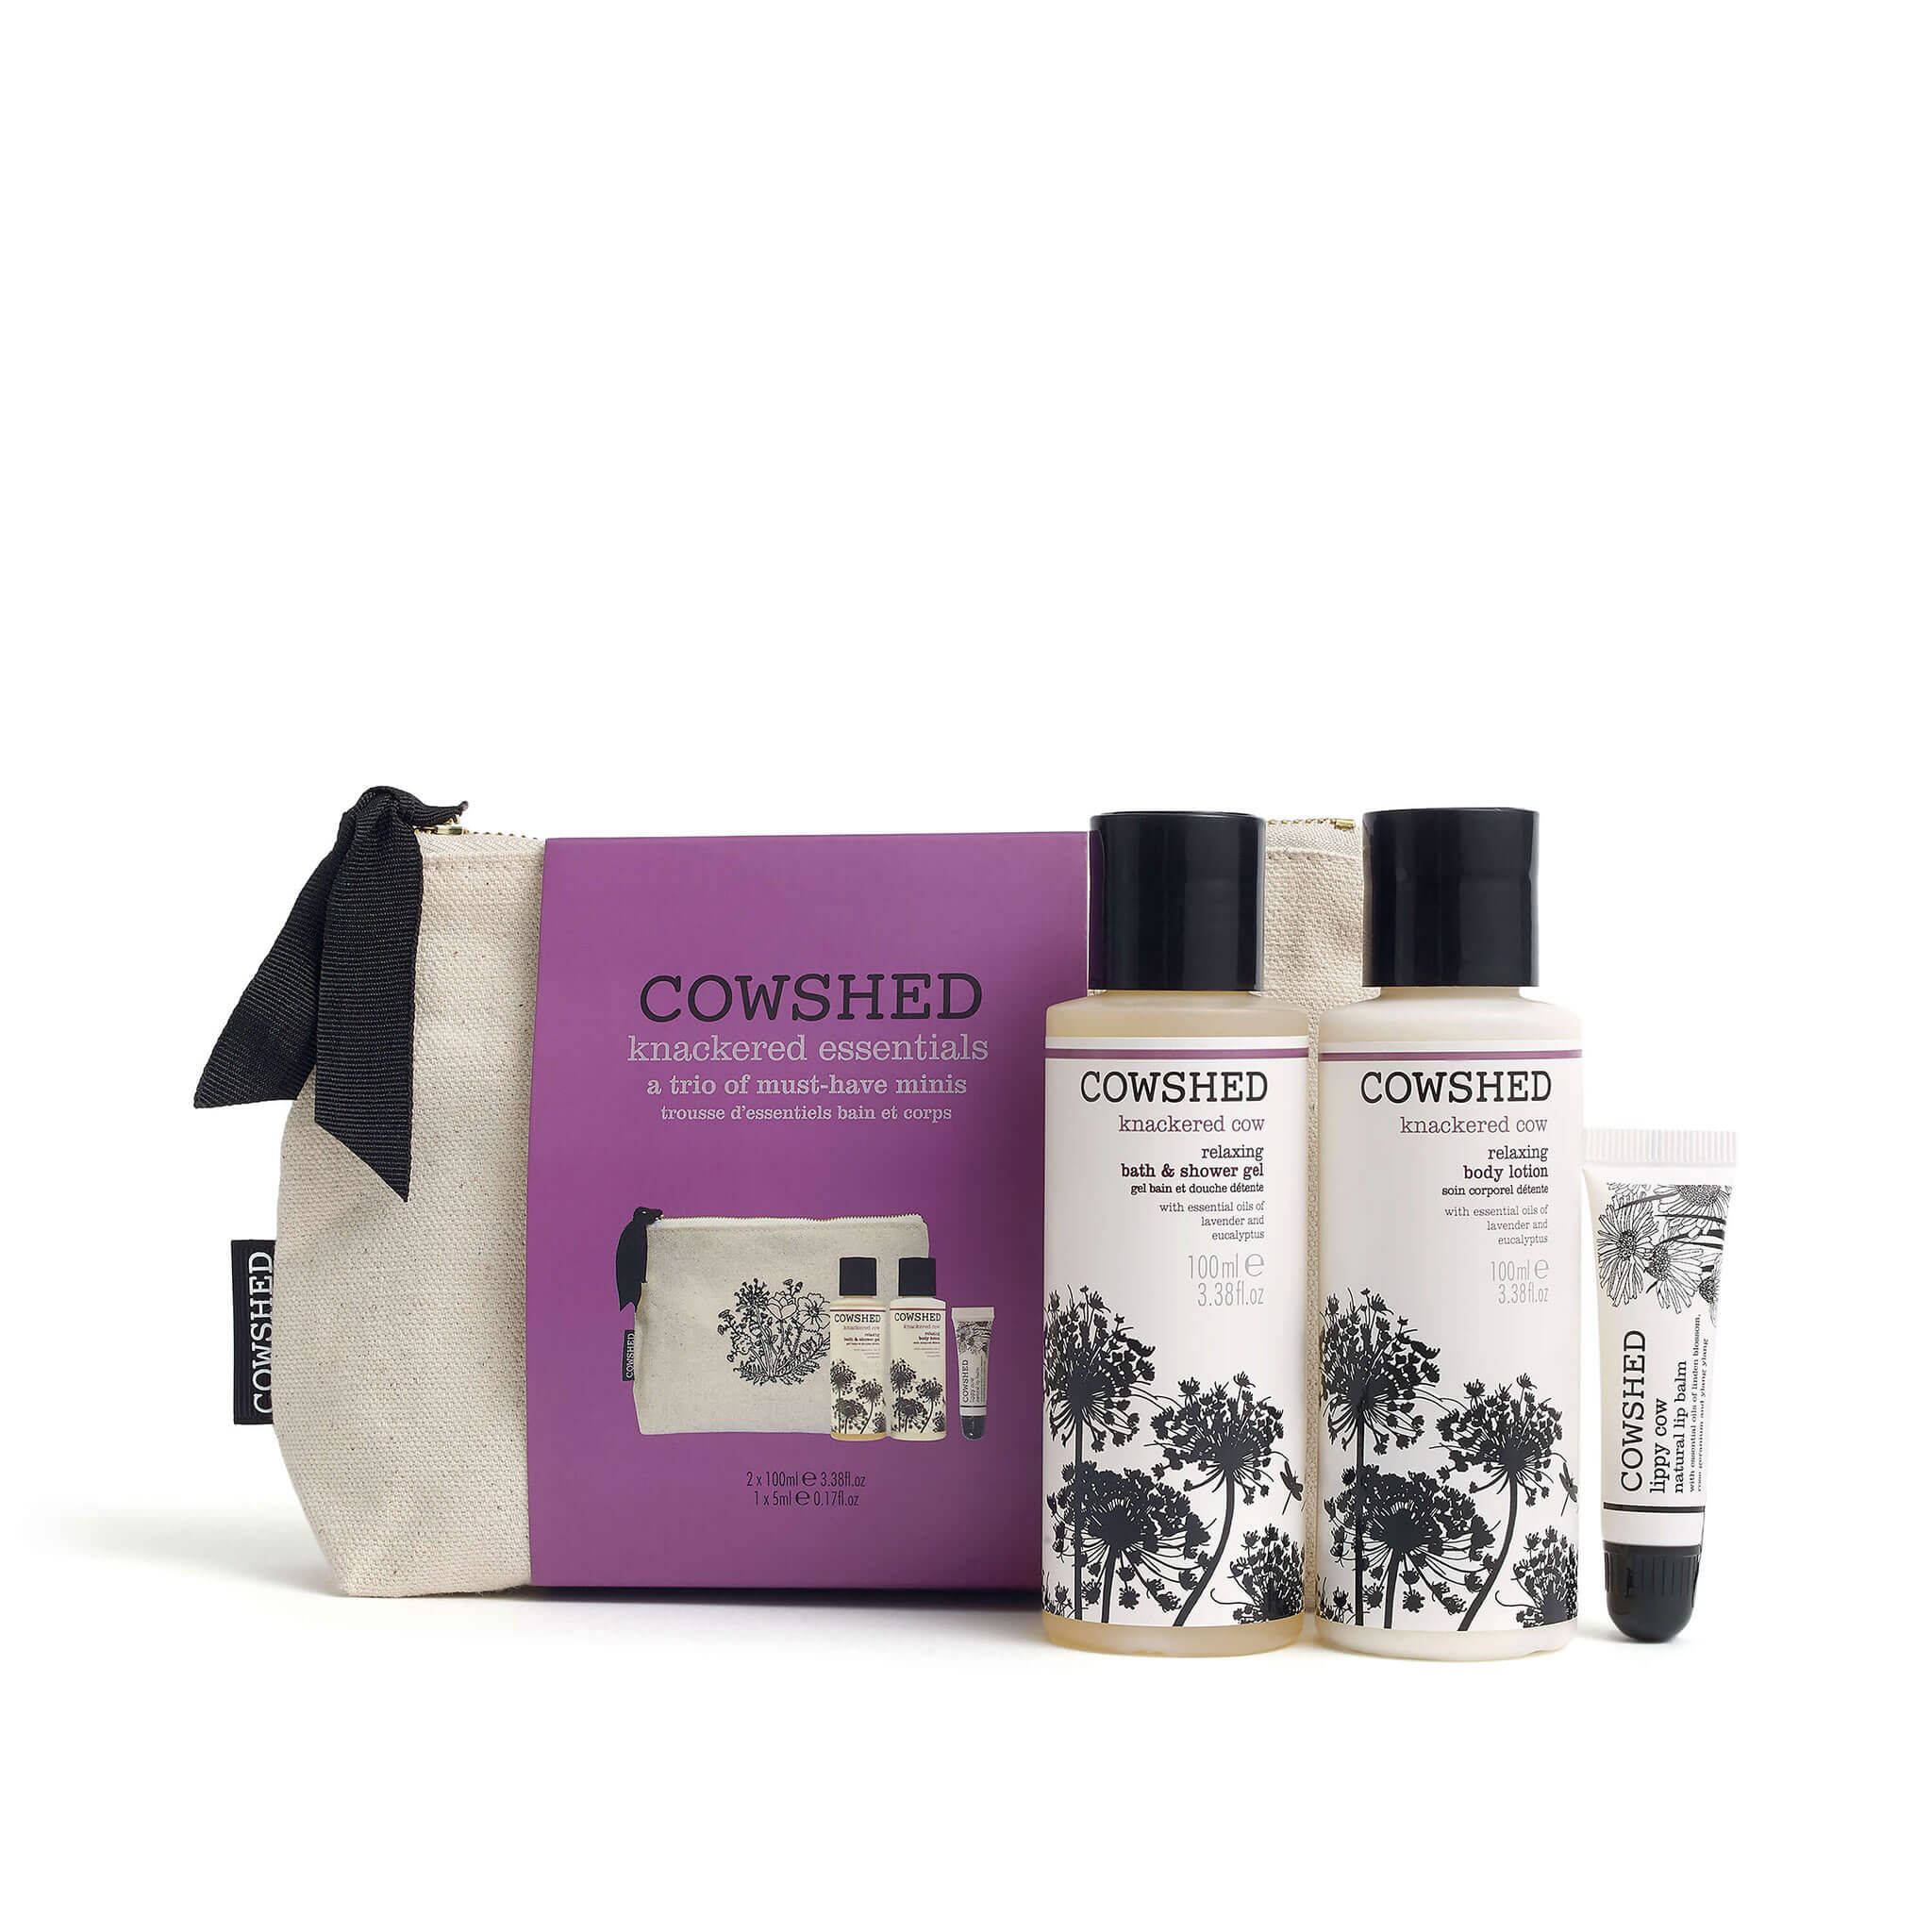 Win a Cowshed Knackered Essentials Kit in June 2019